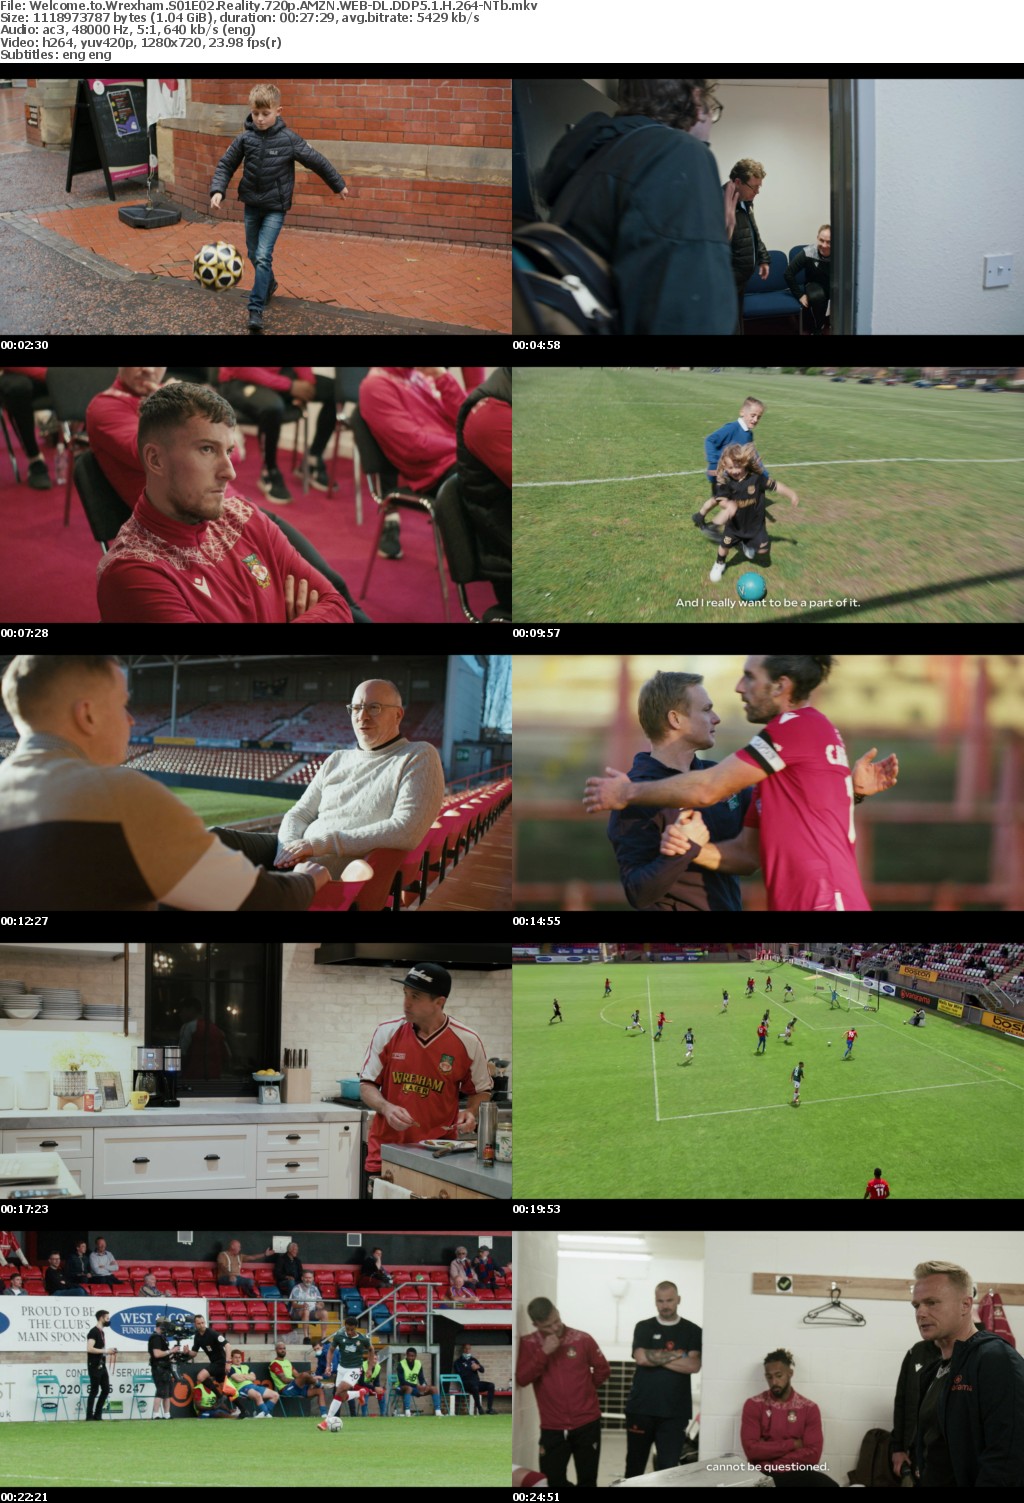 Welcome to Wrexham S01E02 Reality 720p AMZN WEBRip DDP5 1 x264-NTb